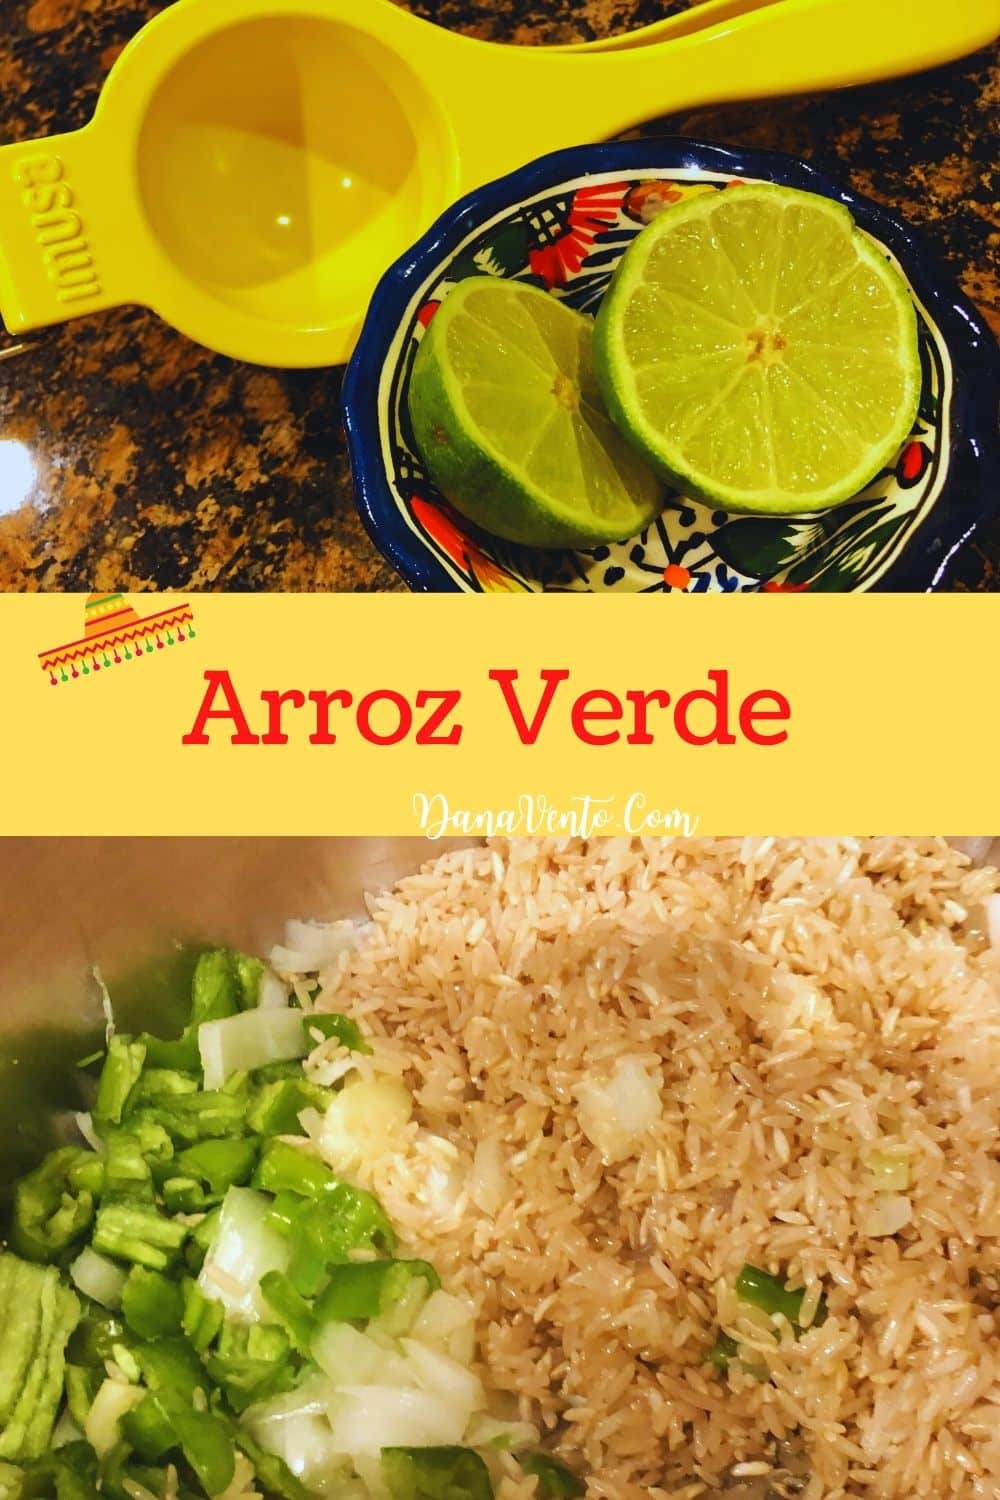 Some of the Ingredients for Arroz Verde